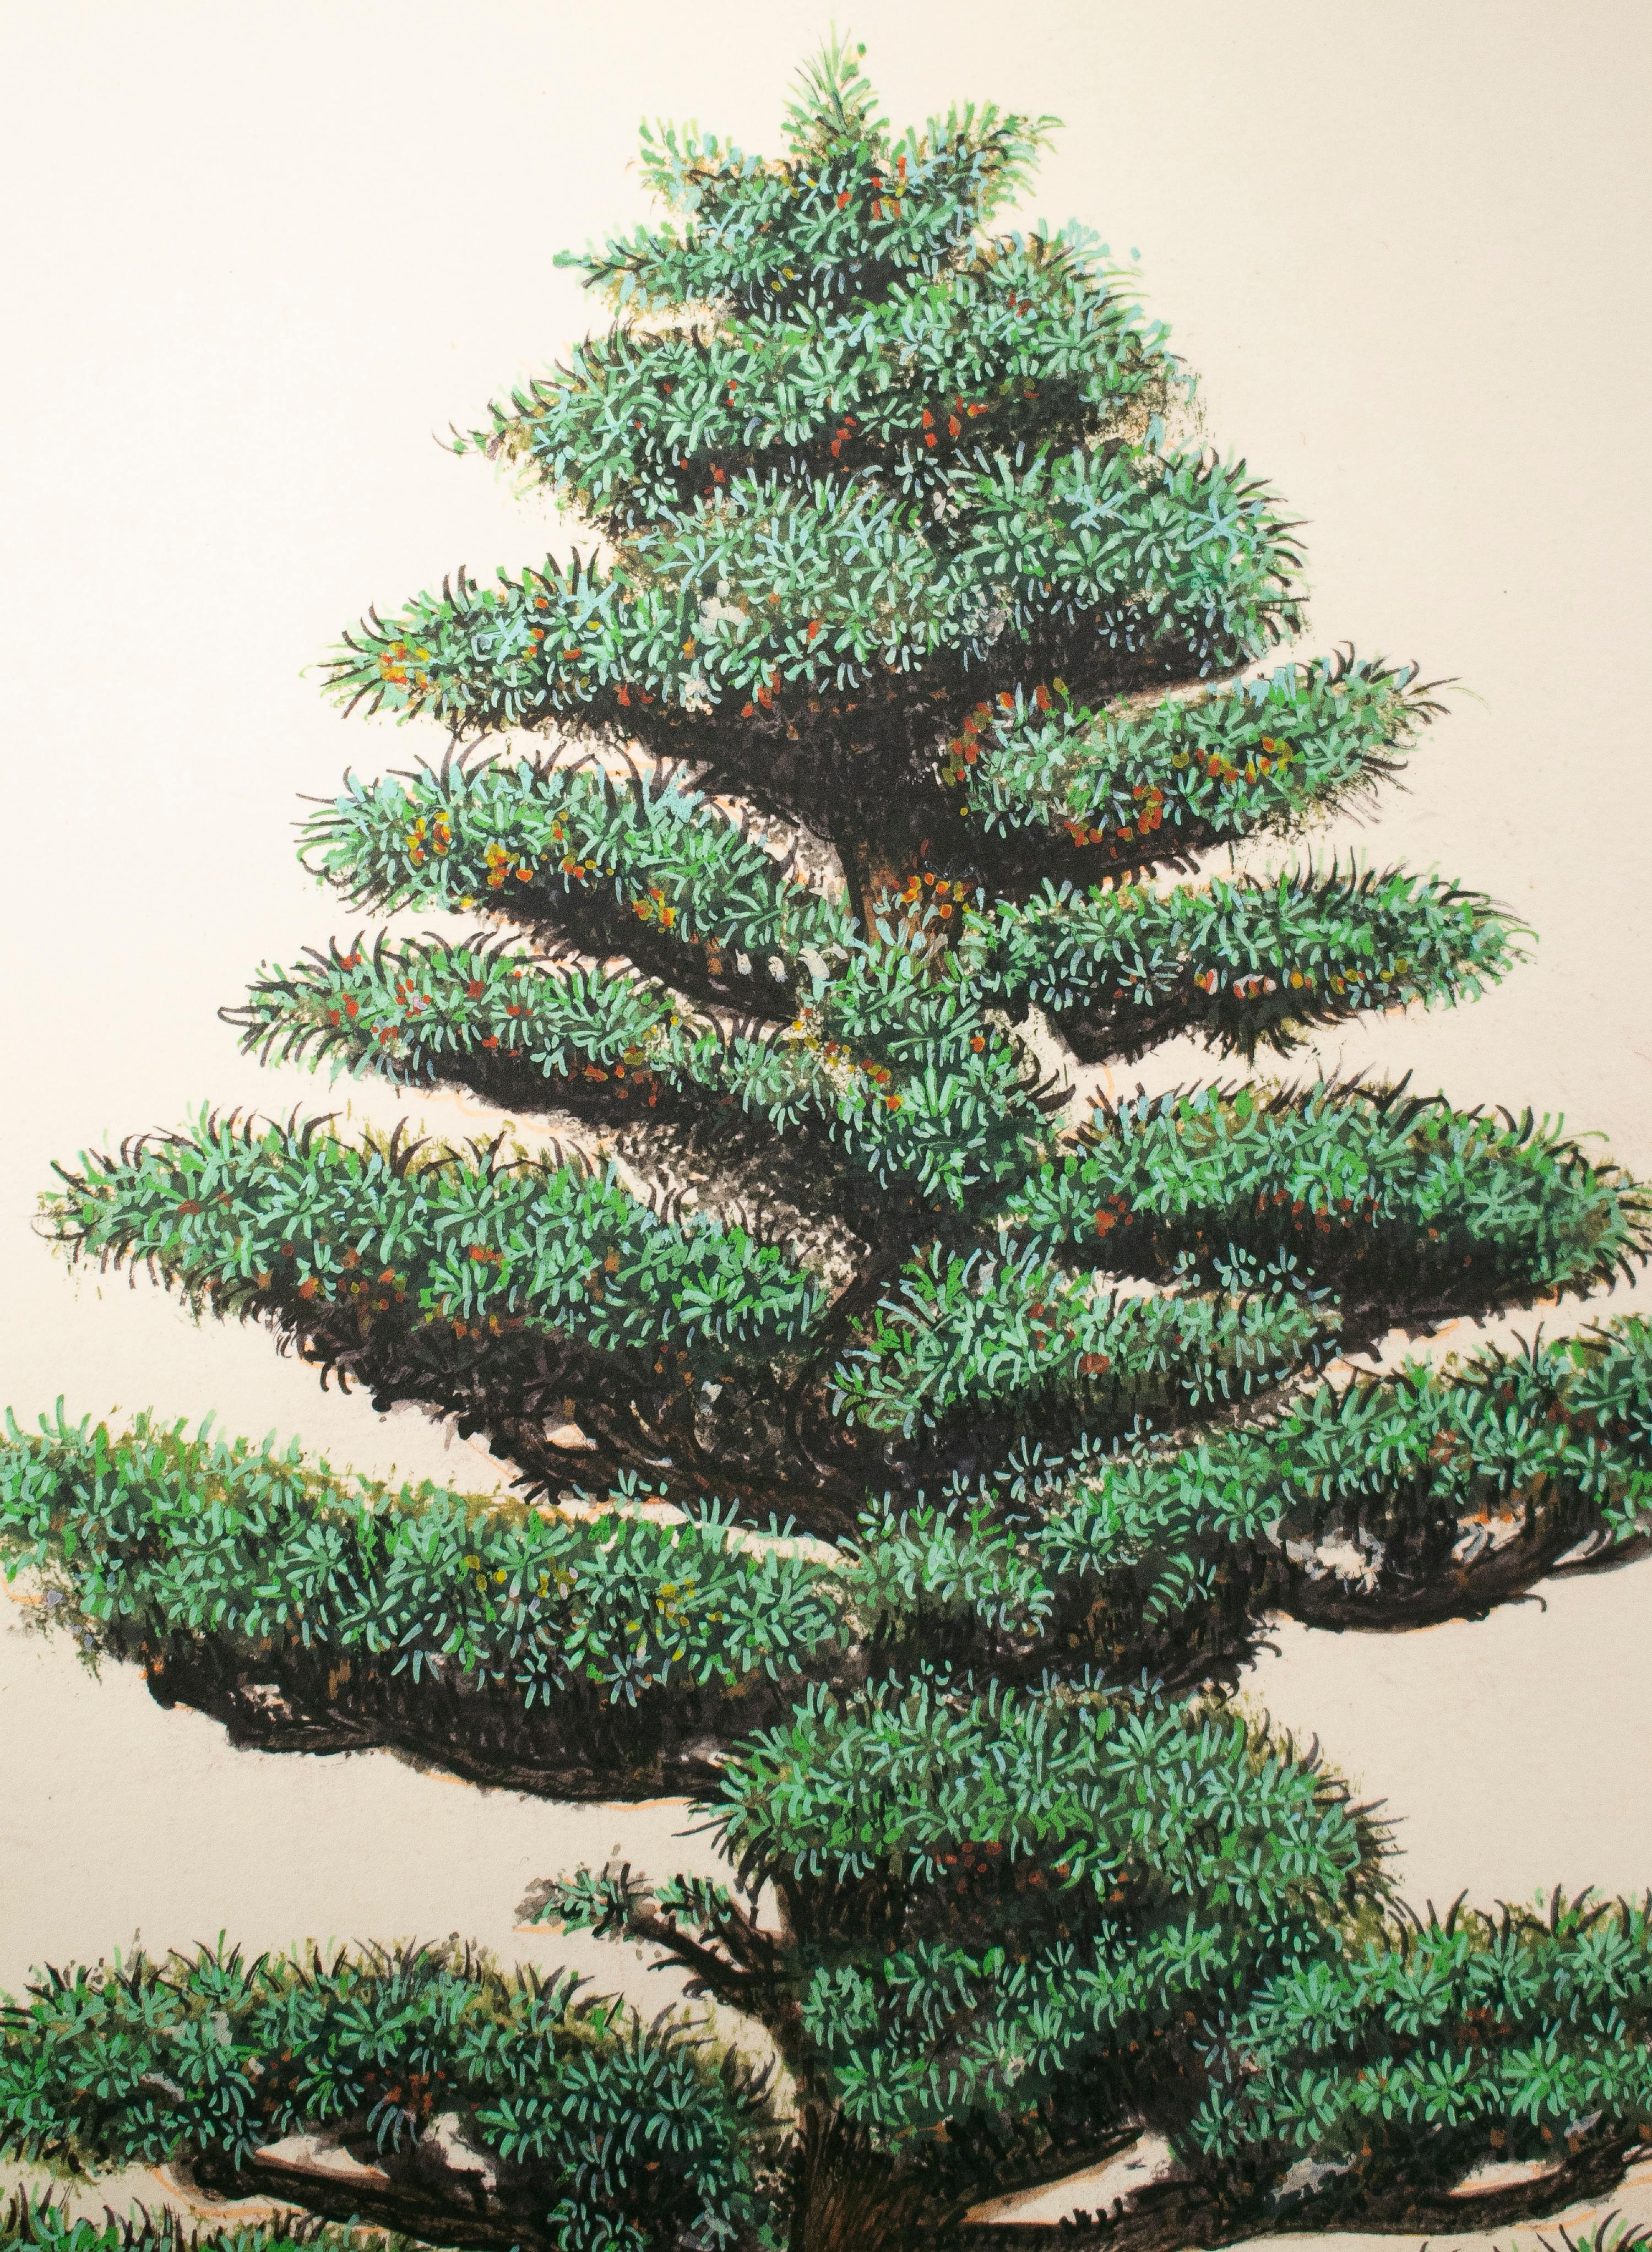 Hand-Painted 1970s Indian Bonsai Paper Drawing For Sale